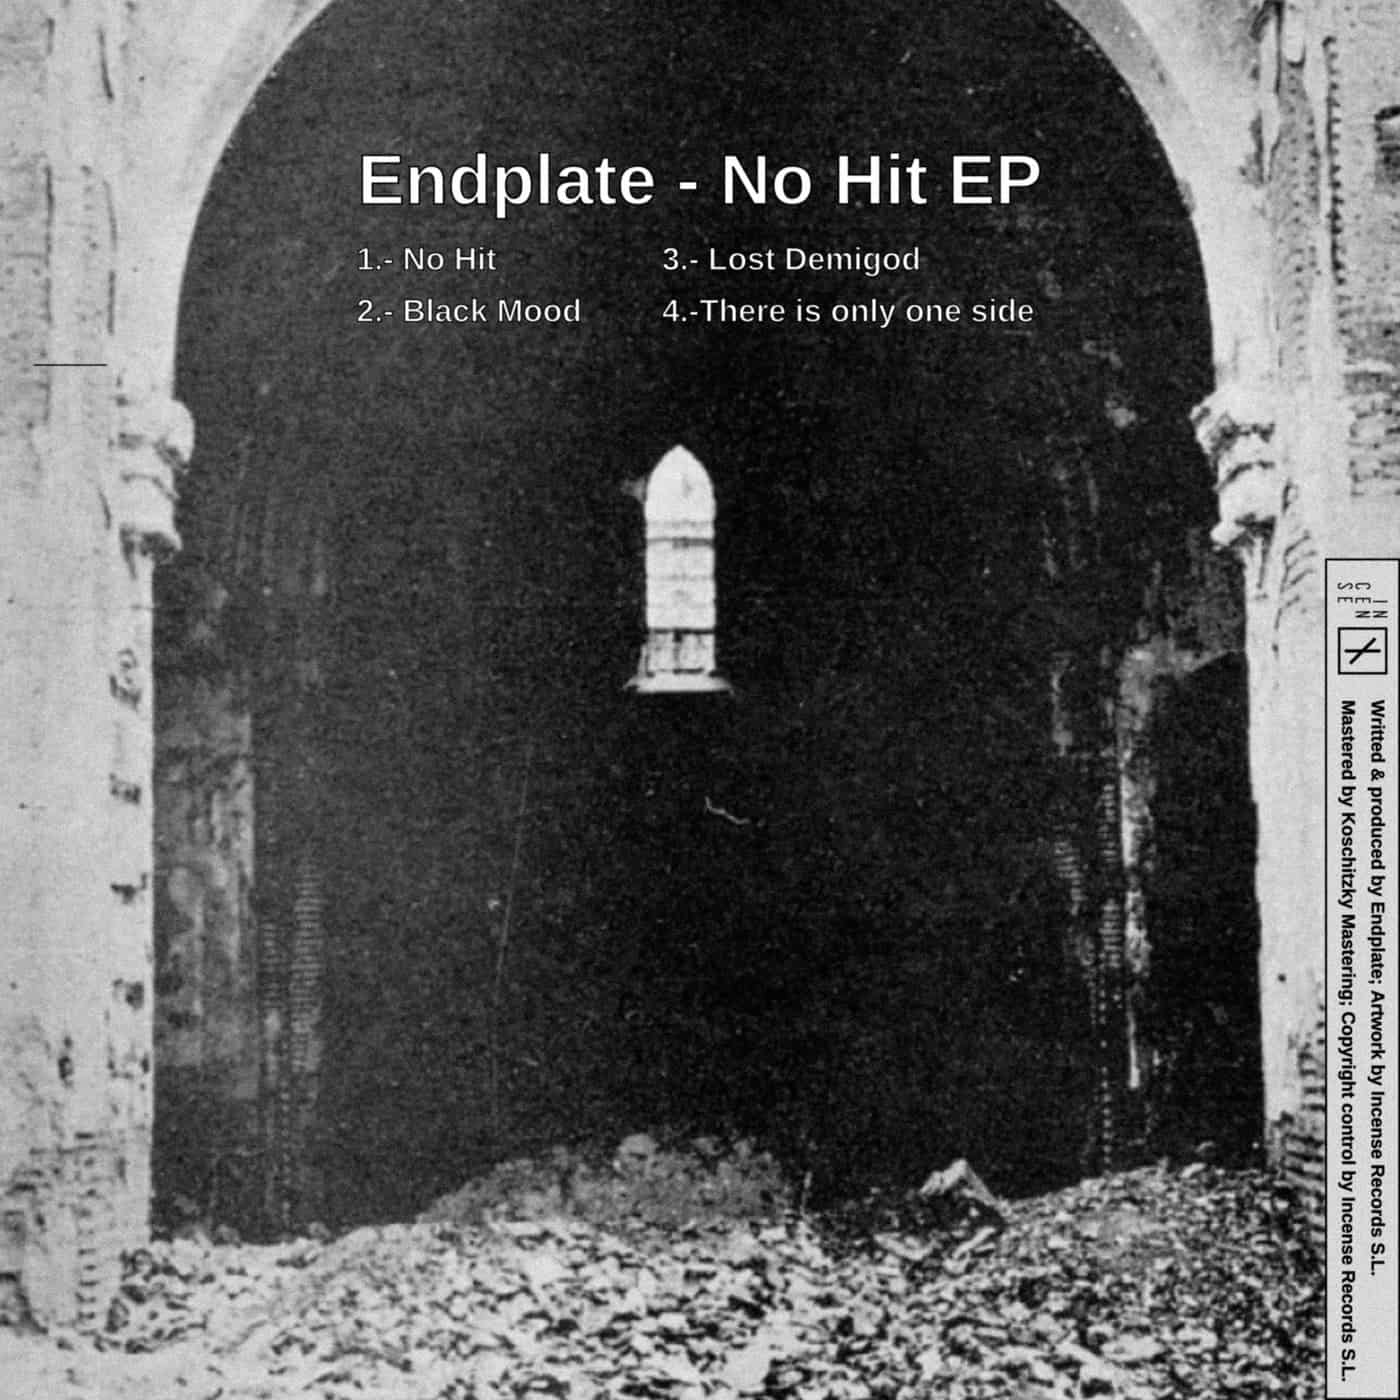 Download Endplate - No Hit on Electrobuzz